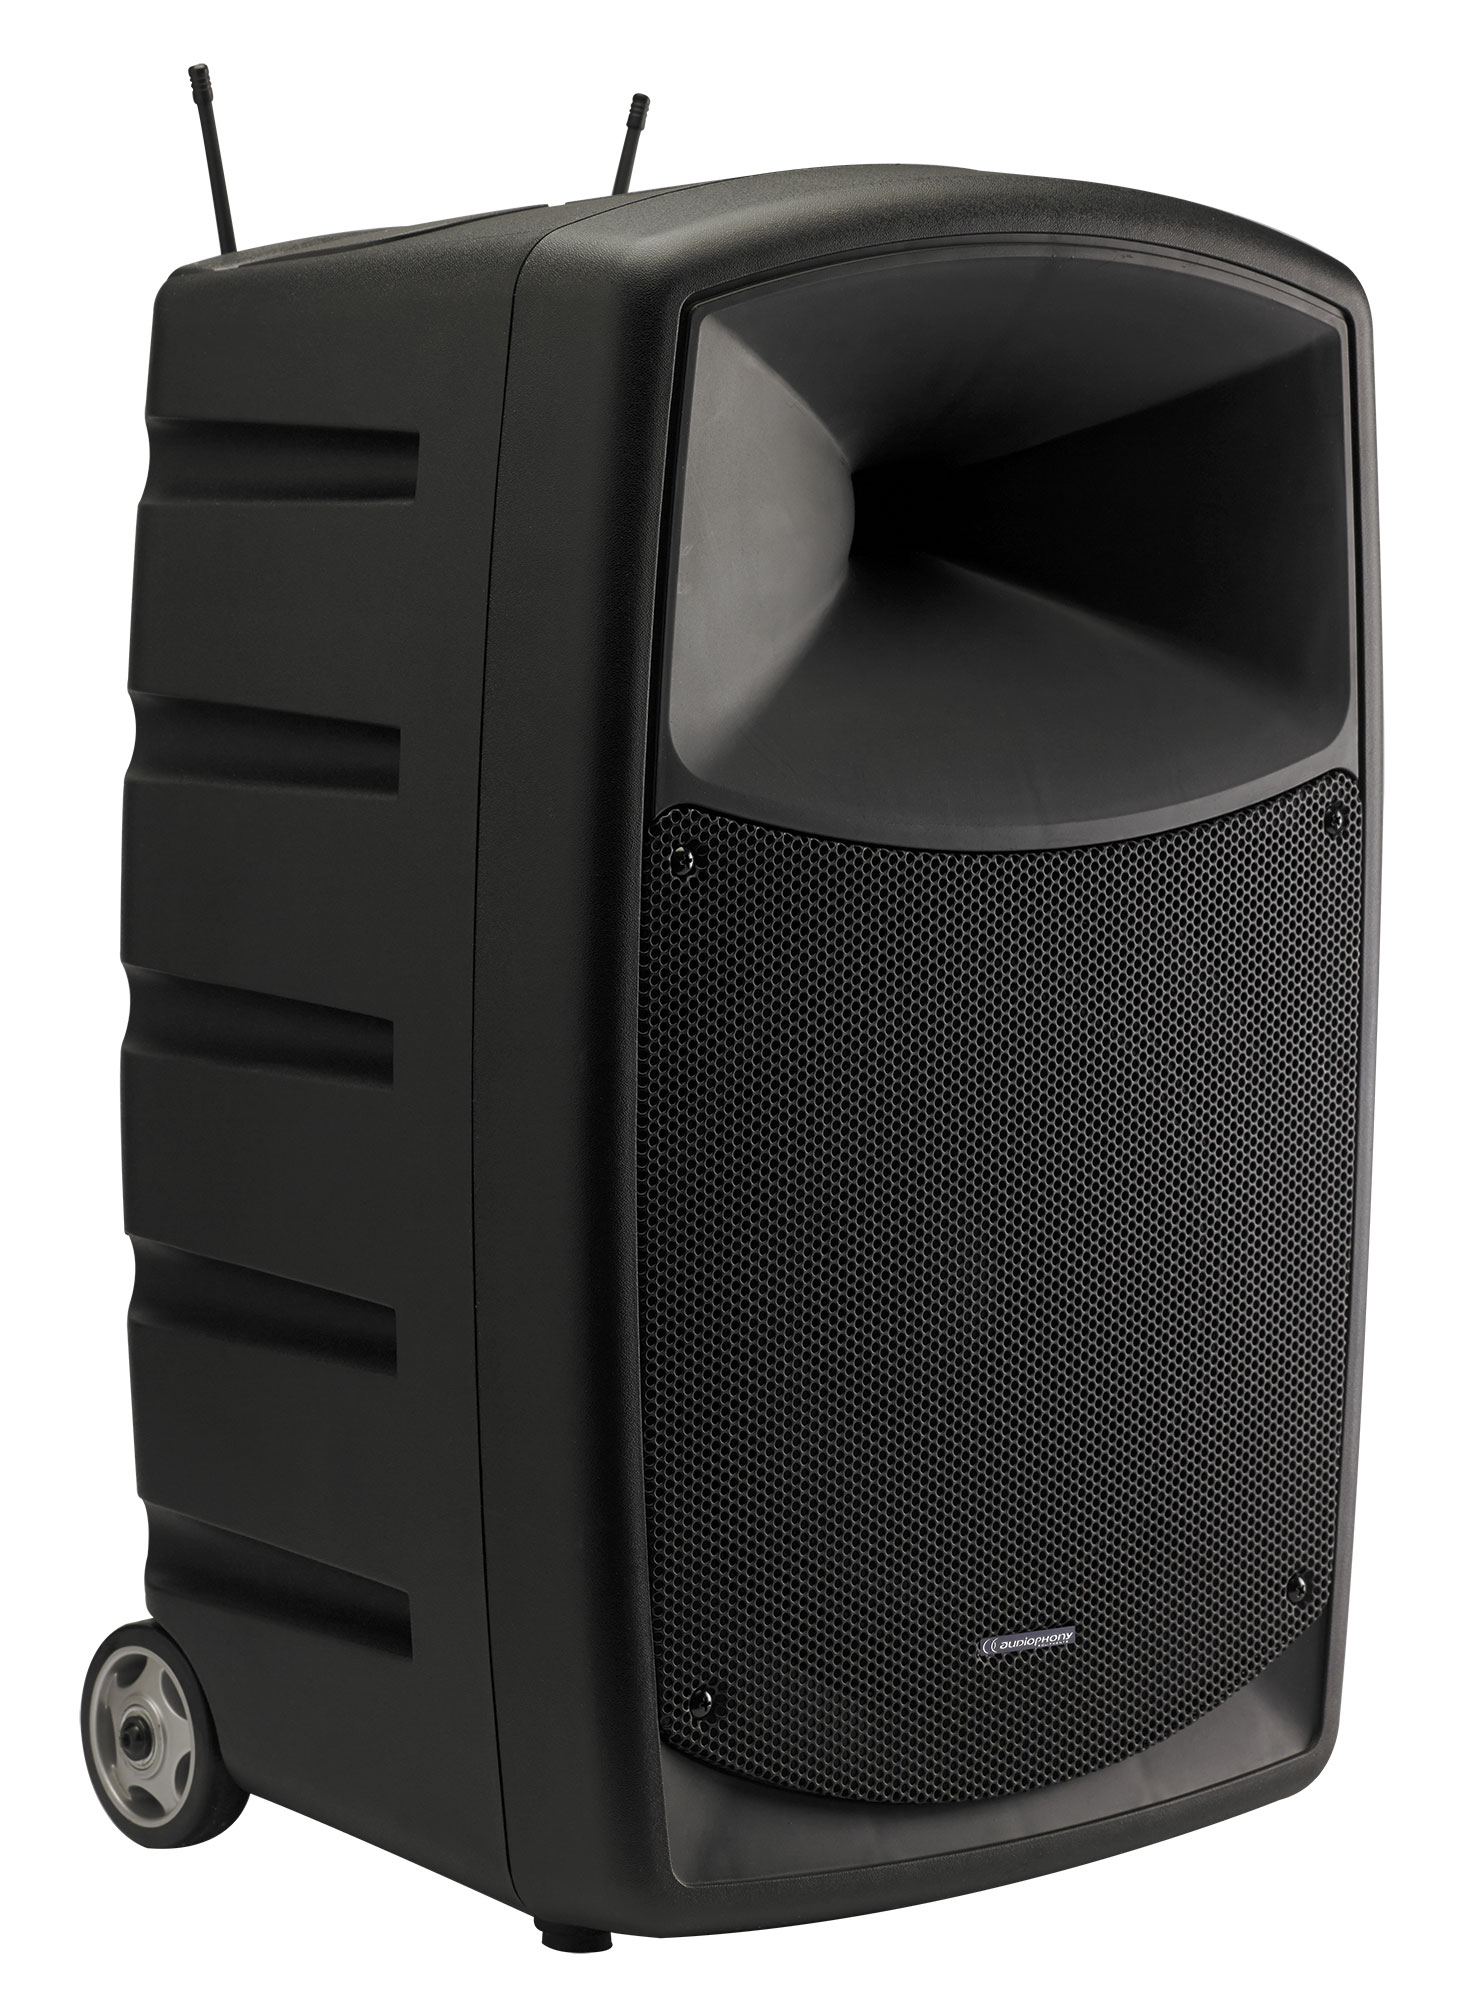 Battery-powered portable sound system, 120W with Bluetooth, USB reader and two UHF microphones - 800MHz range <p hidden>accu akku</p>